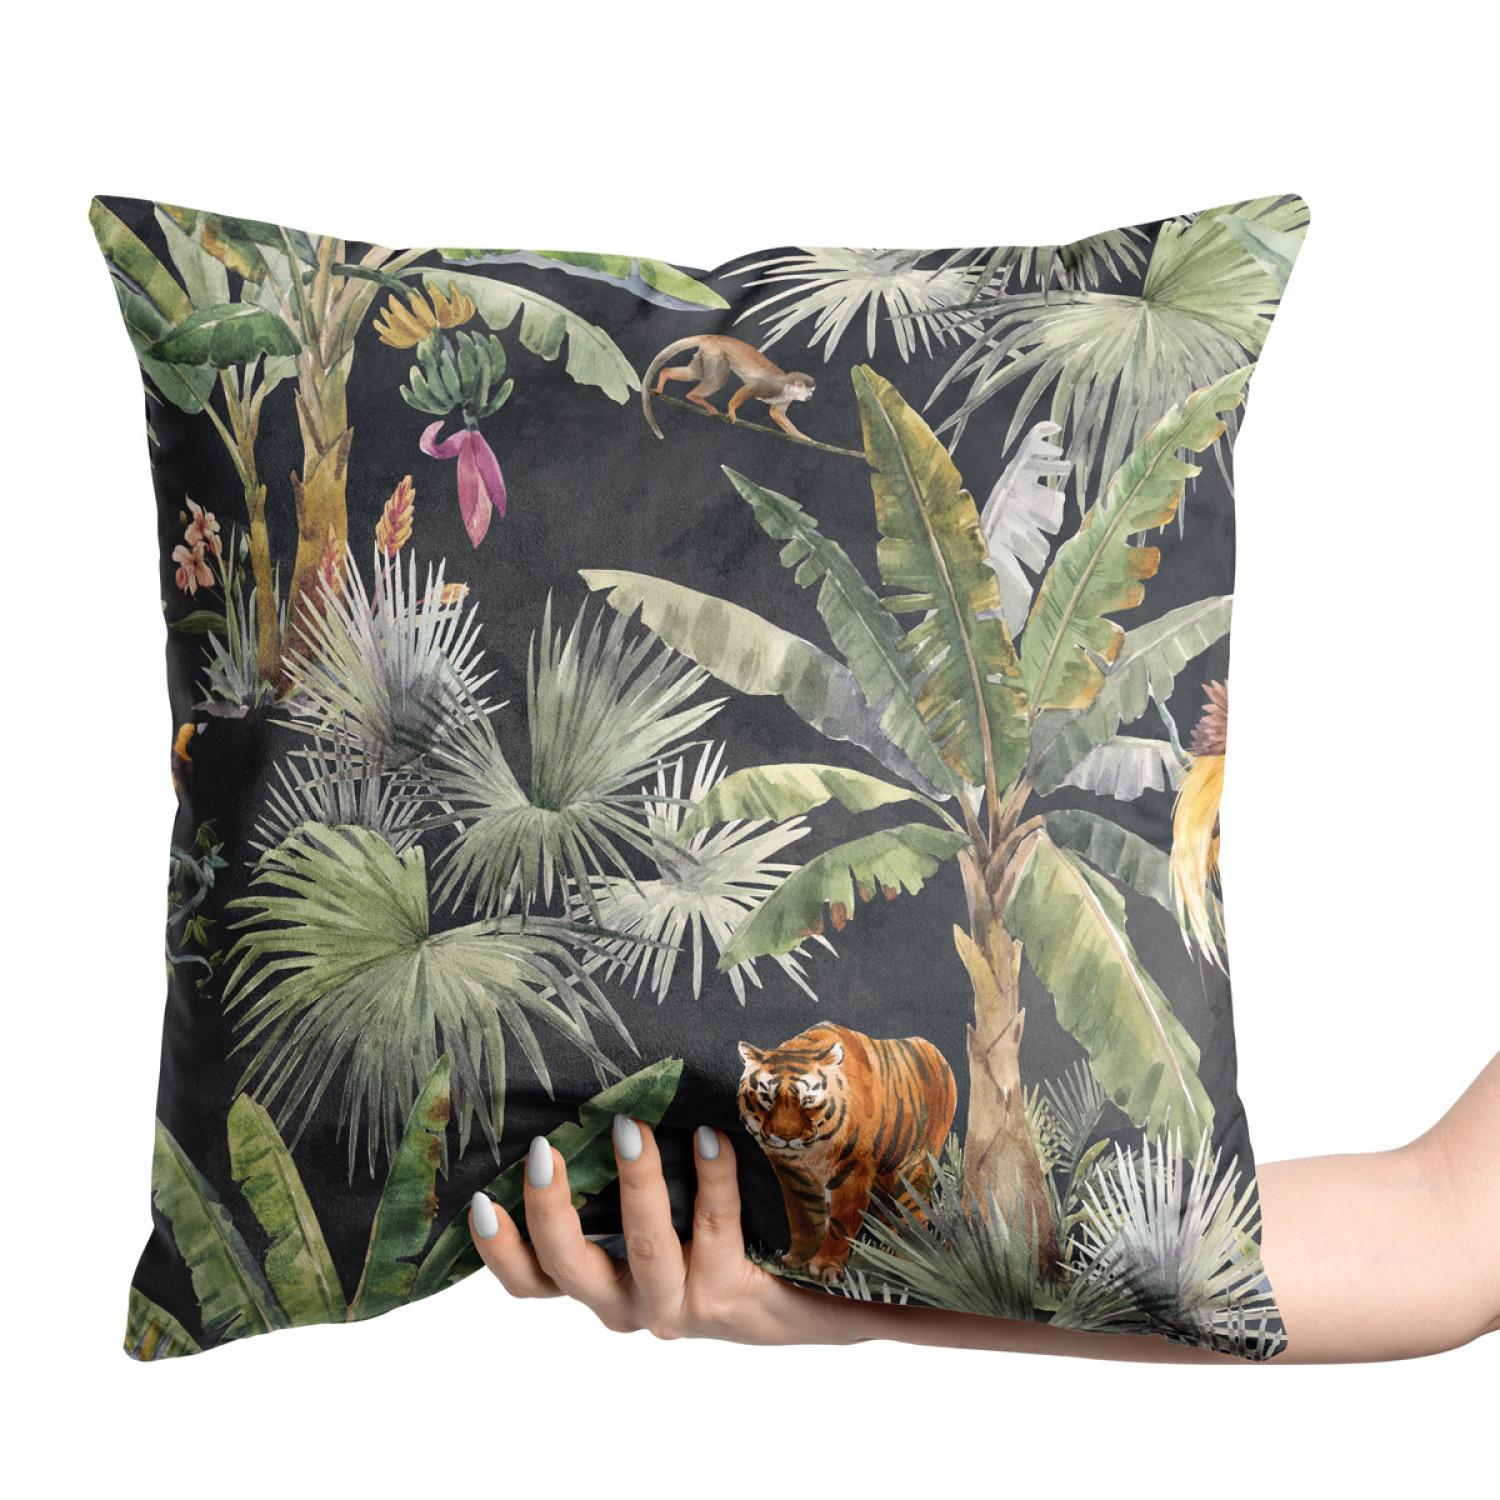 Decorative Velor Pillow In the jungle - palm trees, tiger and monkey on dark background